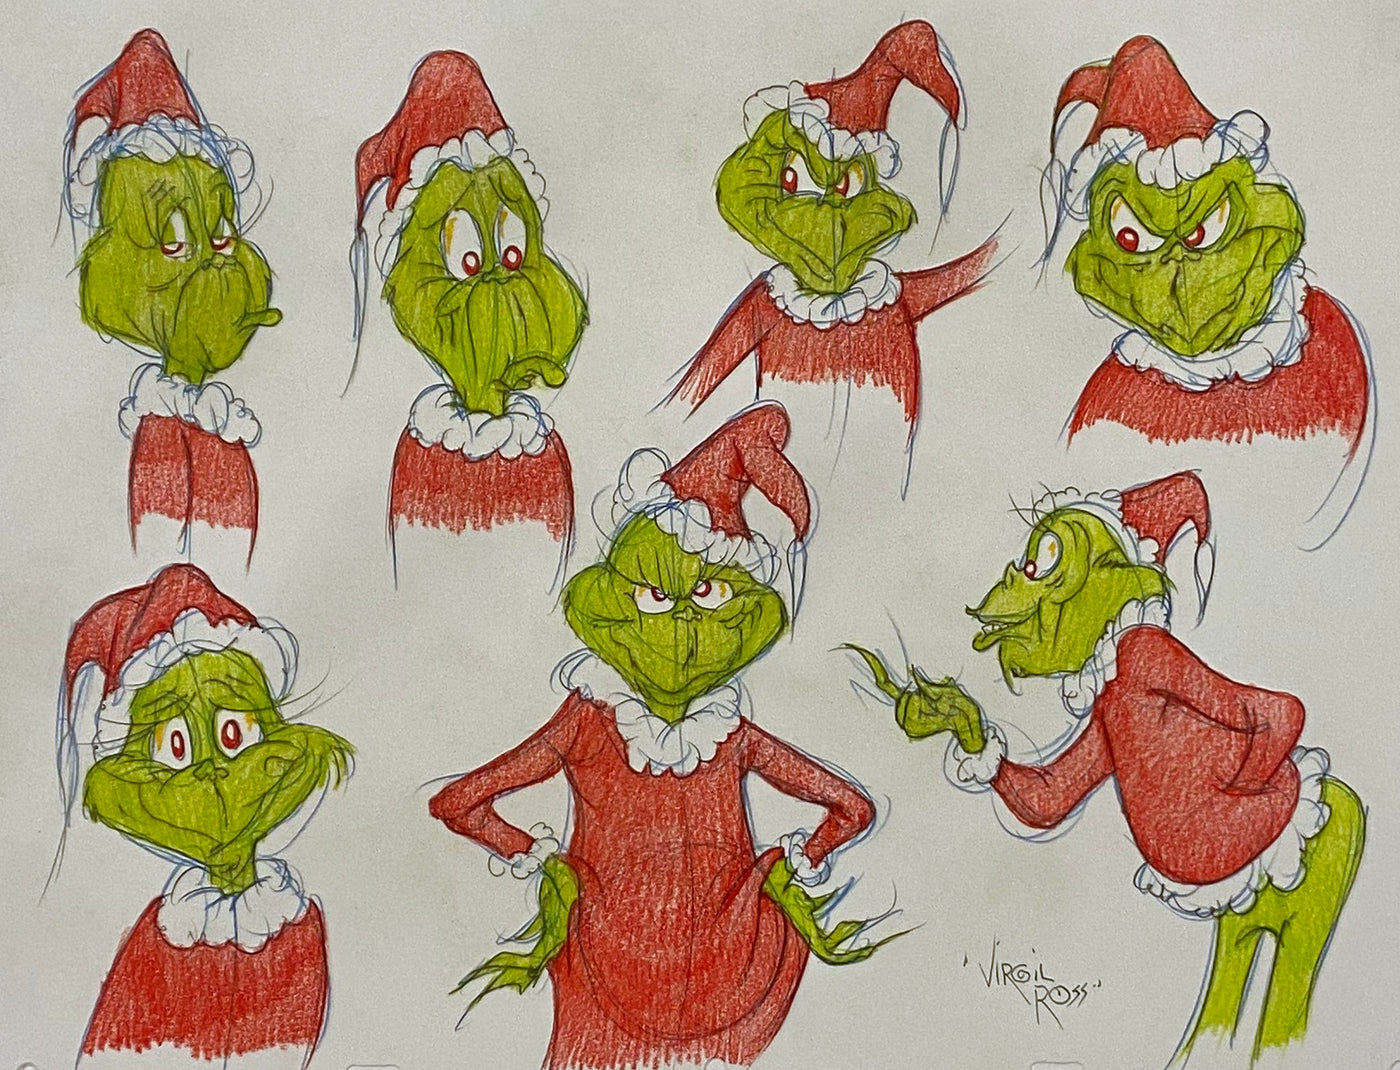 Original Warner Brothers Virgil Ross Model Sheet Animation Drawing featuring The Grinch